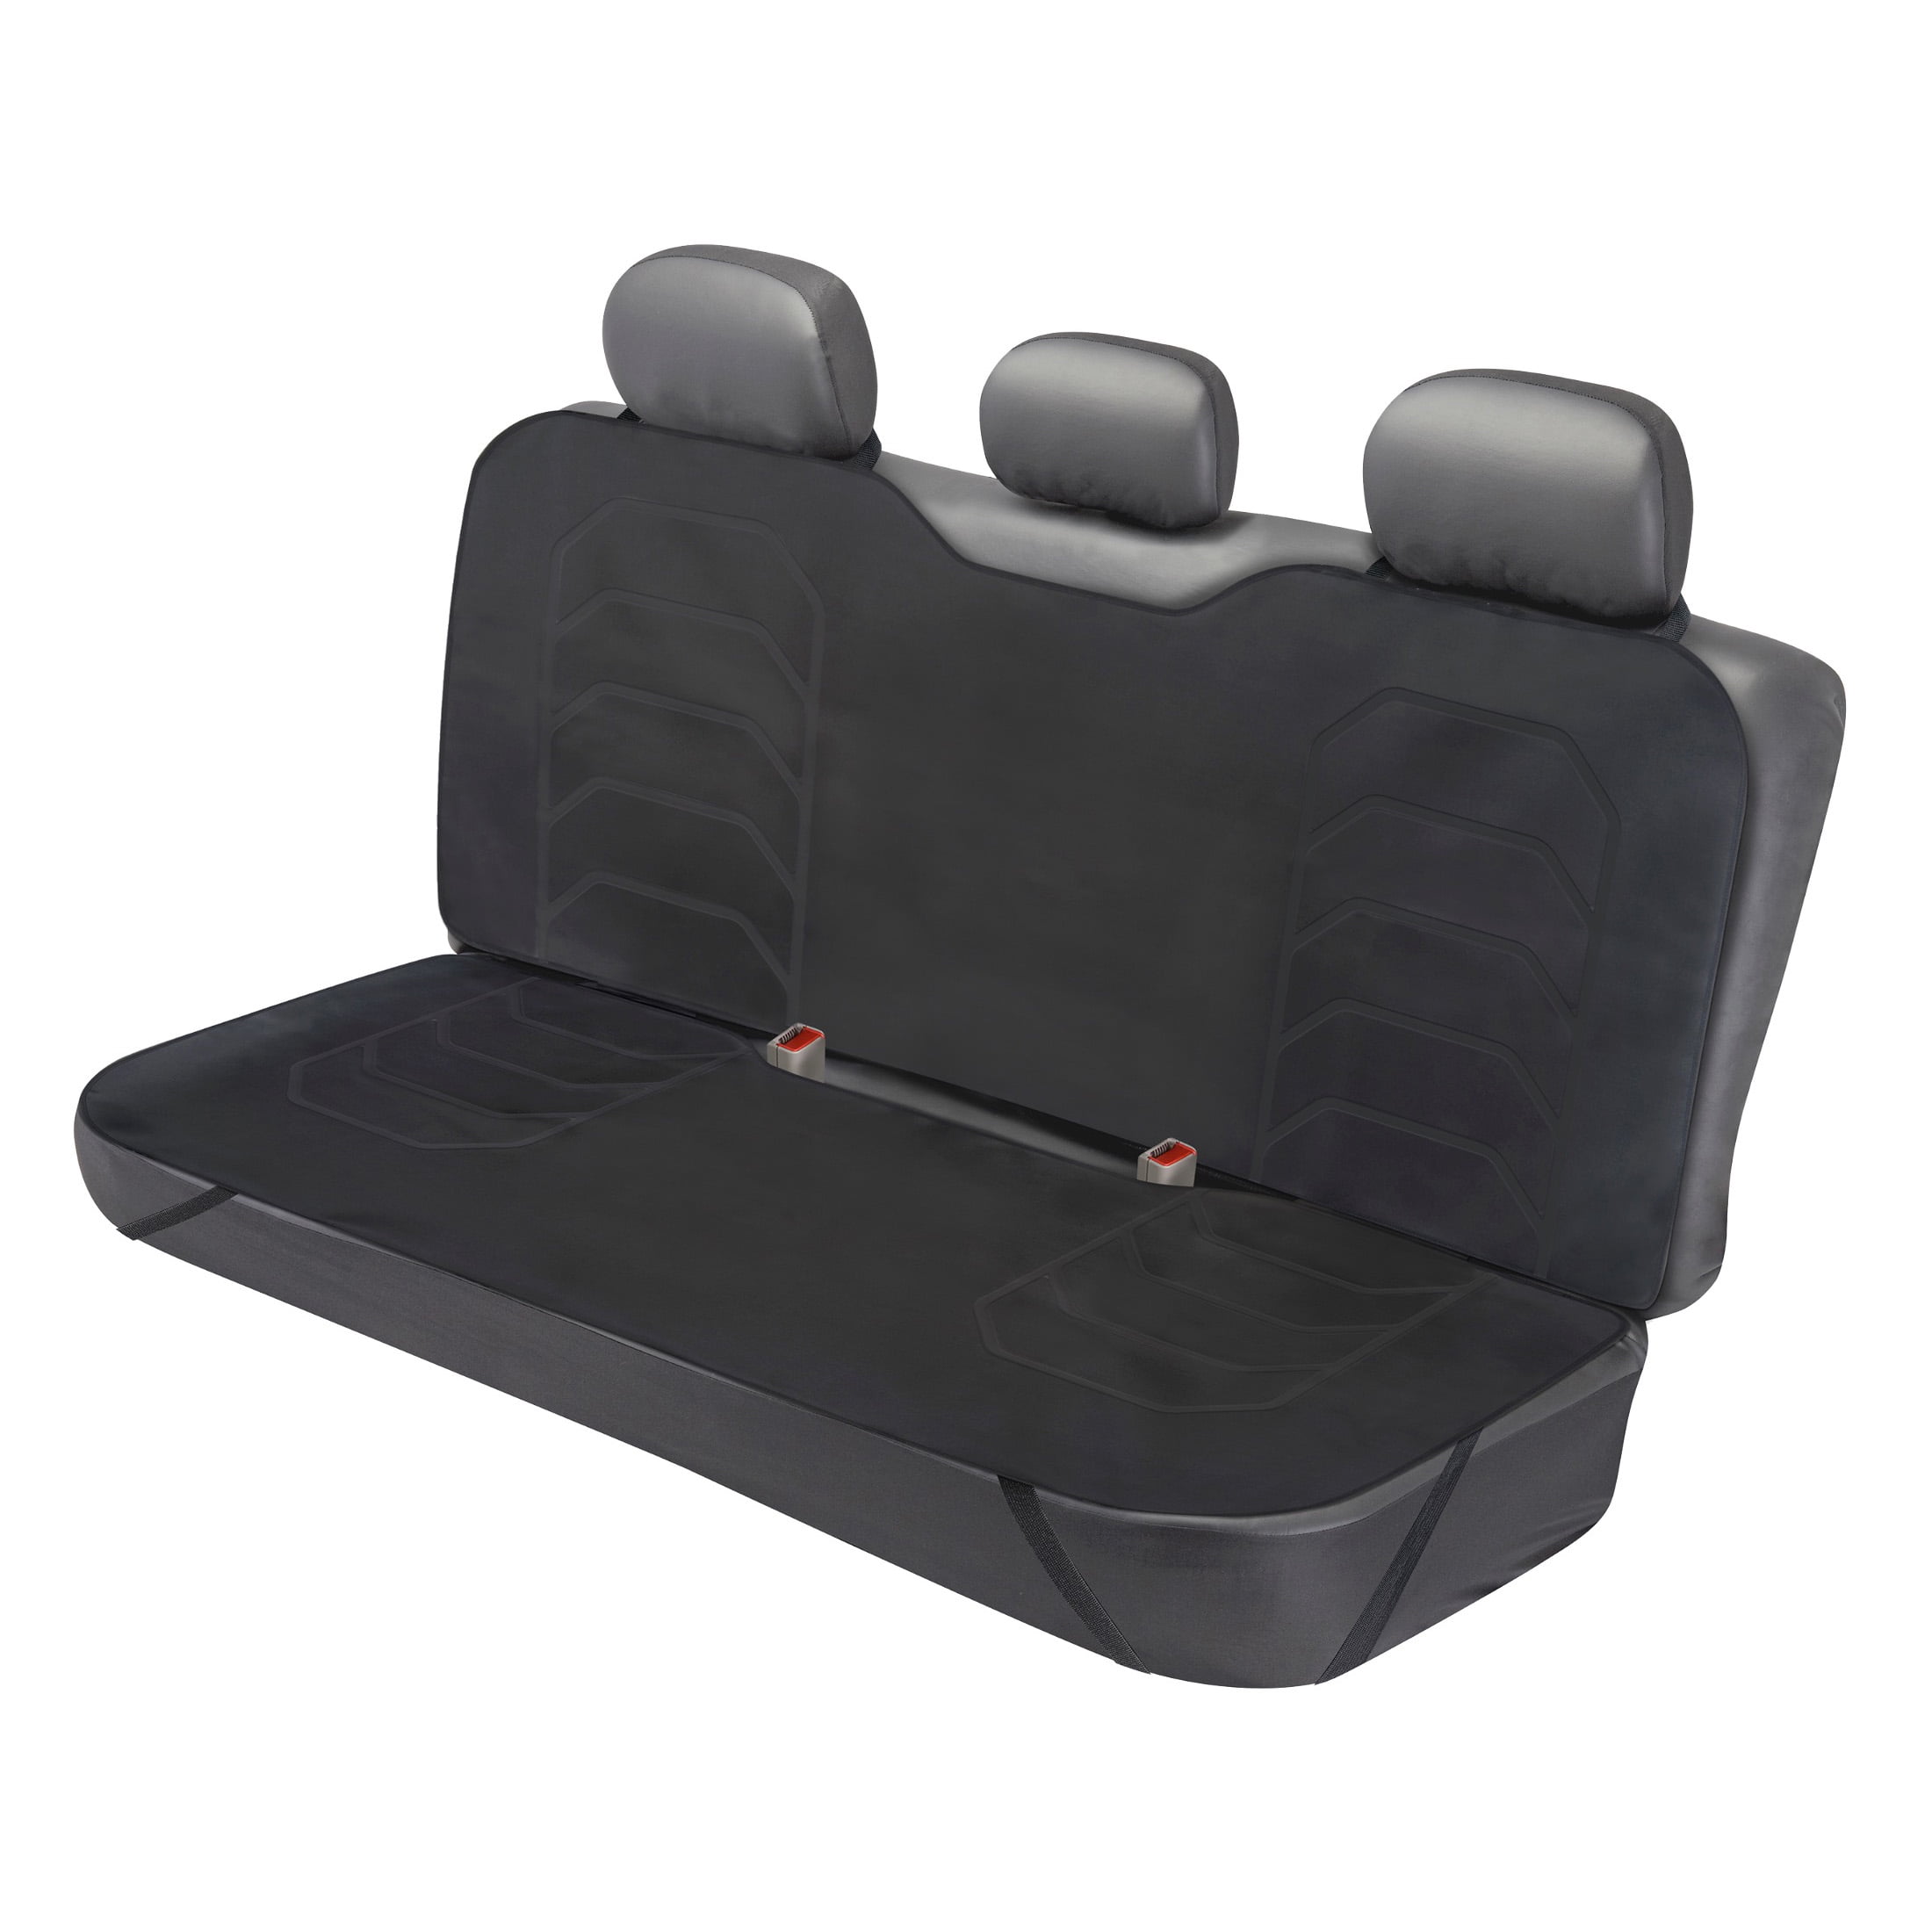 Car Seat Covers for sale in Myrtle Beach, South Carolina